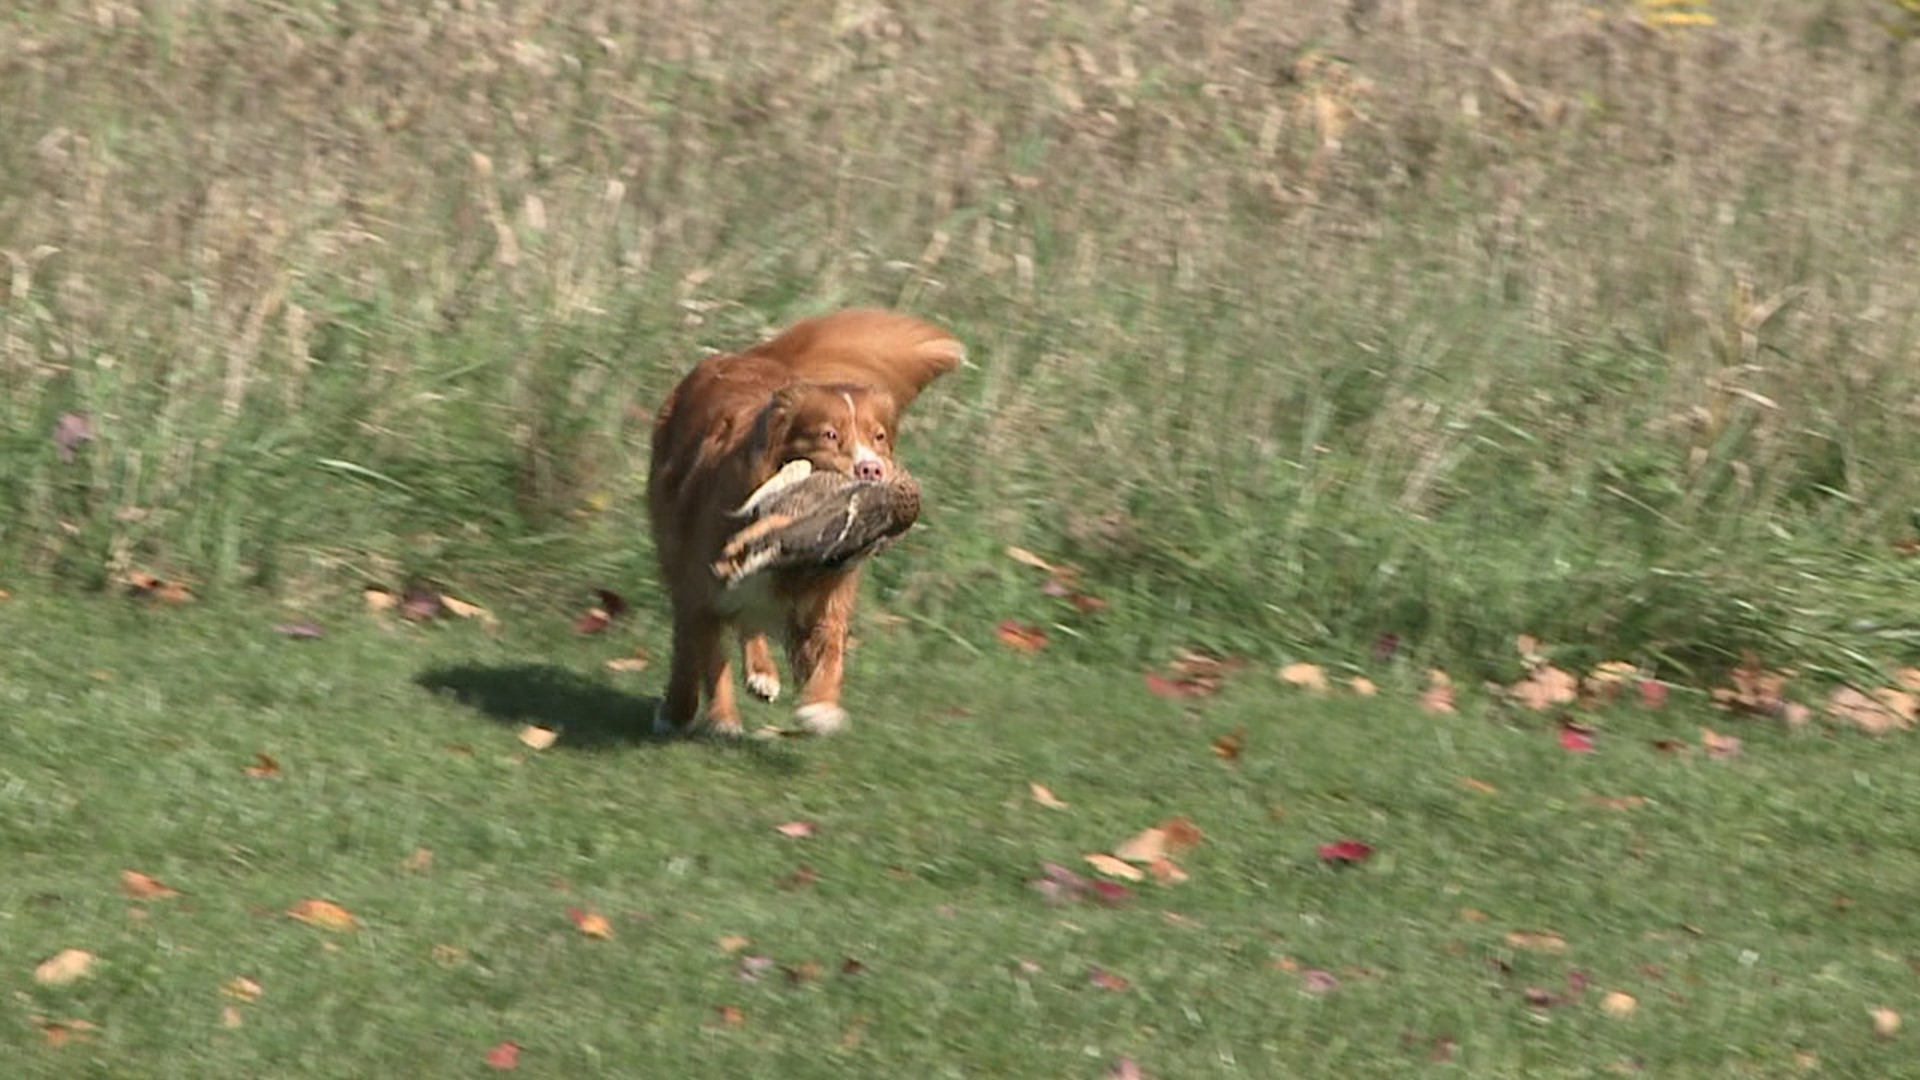 An event in Wyoming County helped dogs get certified as working dogs, doing what they were bred to do, retrieve ducks.